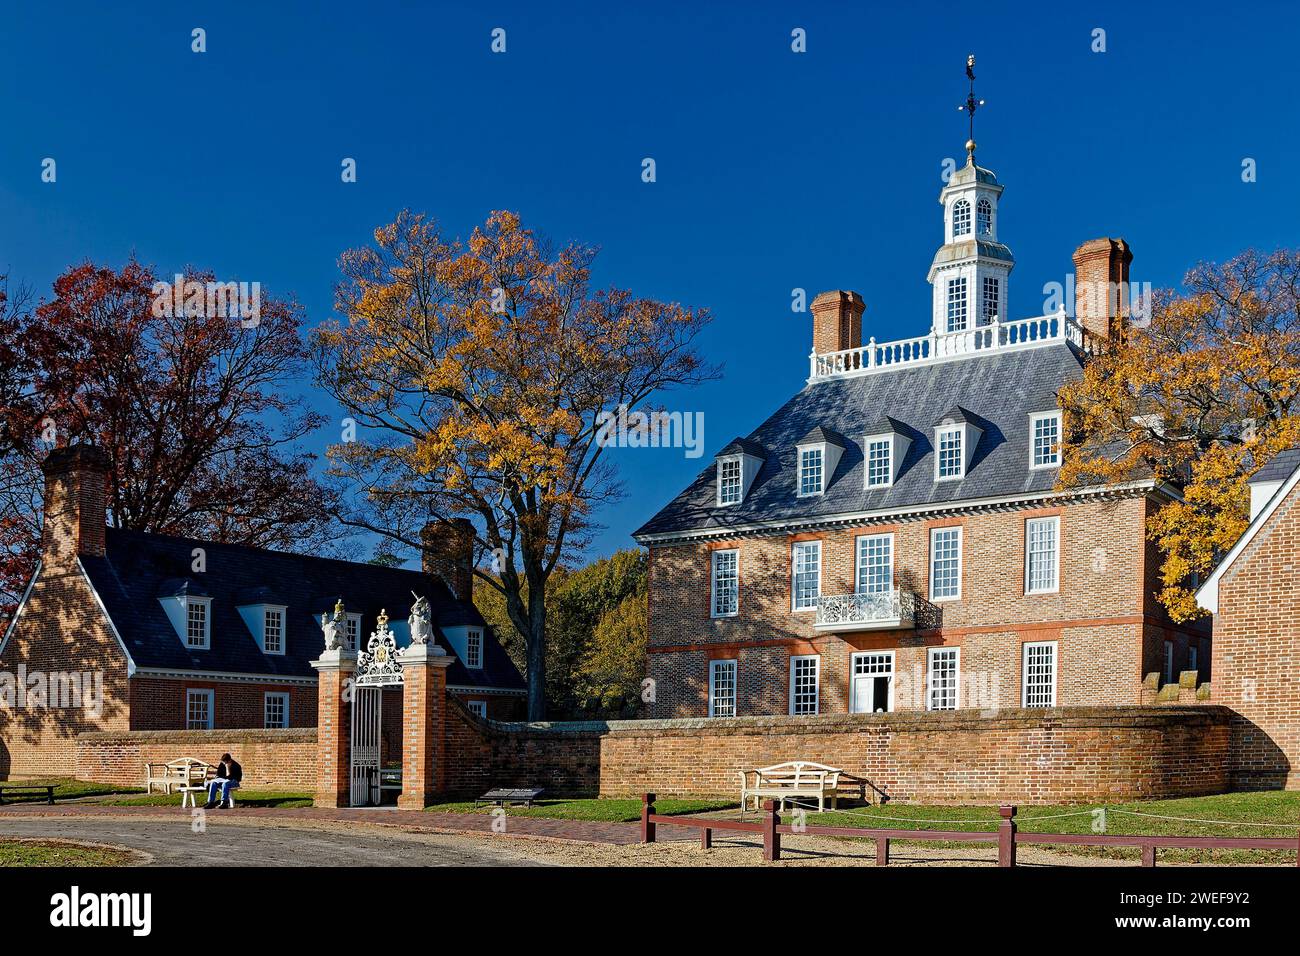 Governor's Palace, 1706, historic site, brick building, symmetrical architecture, East Advance Building, English baroque style, Colonial Revival recon Stock Photo